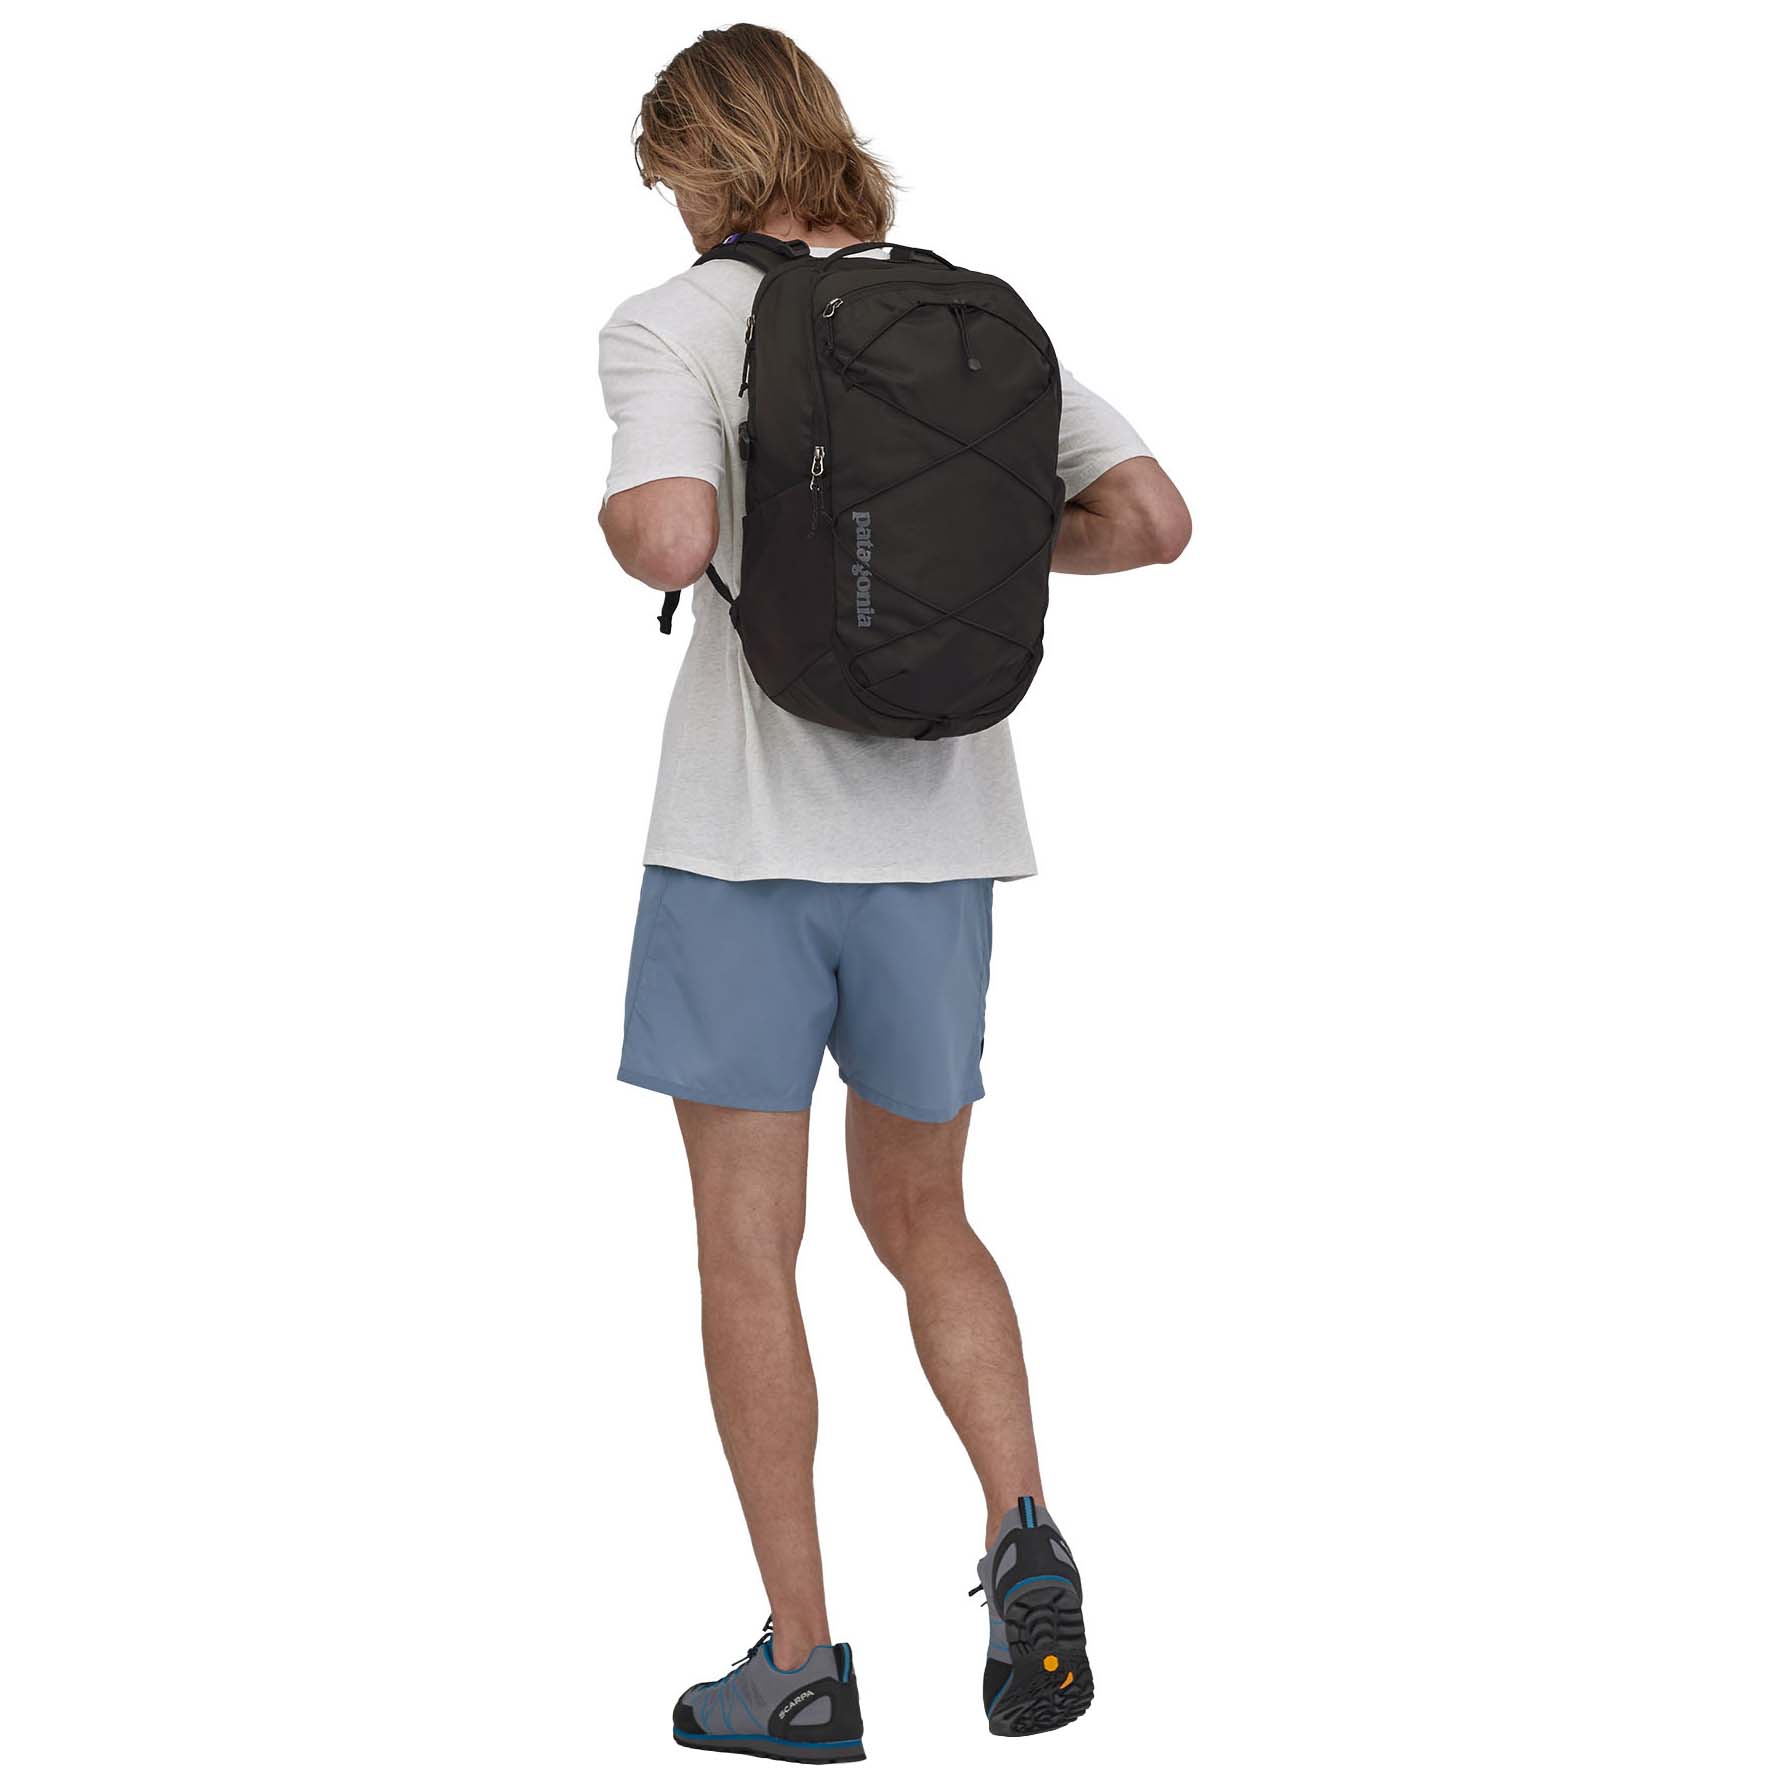 Patagonia Refugio Day Pack 30 Everyday Backpack